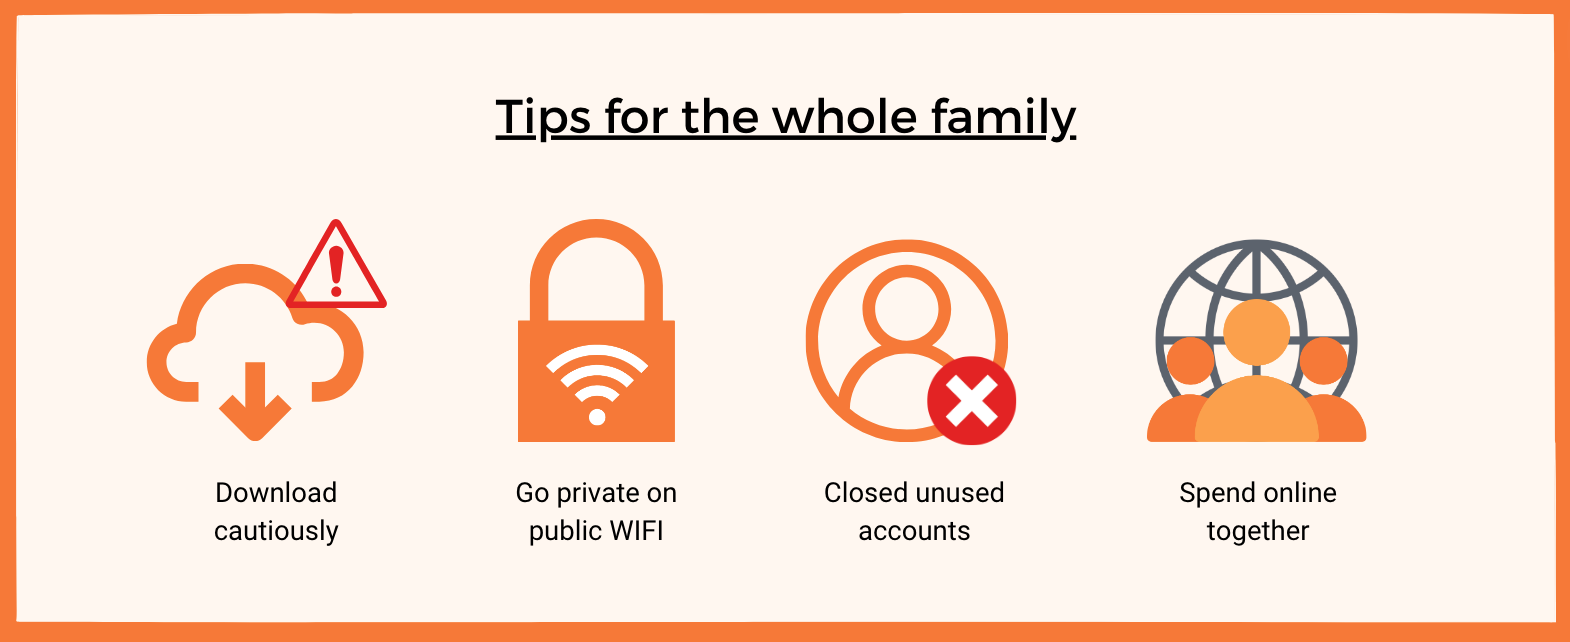 Internet safety tips for family key takeaways